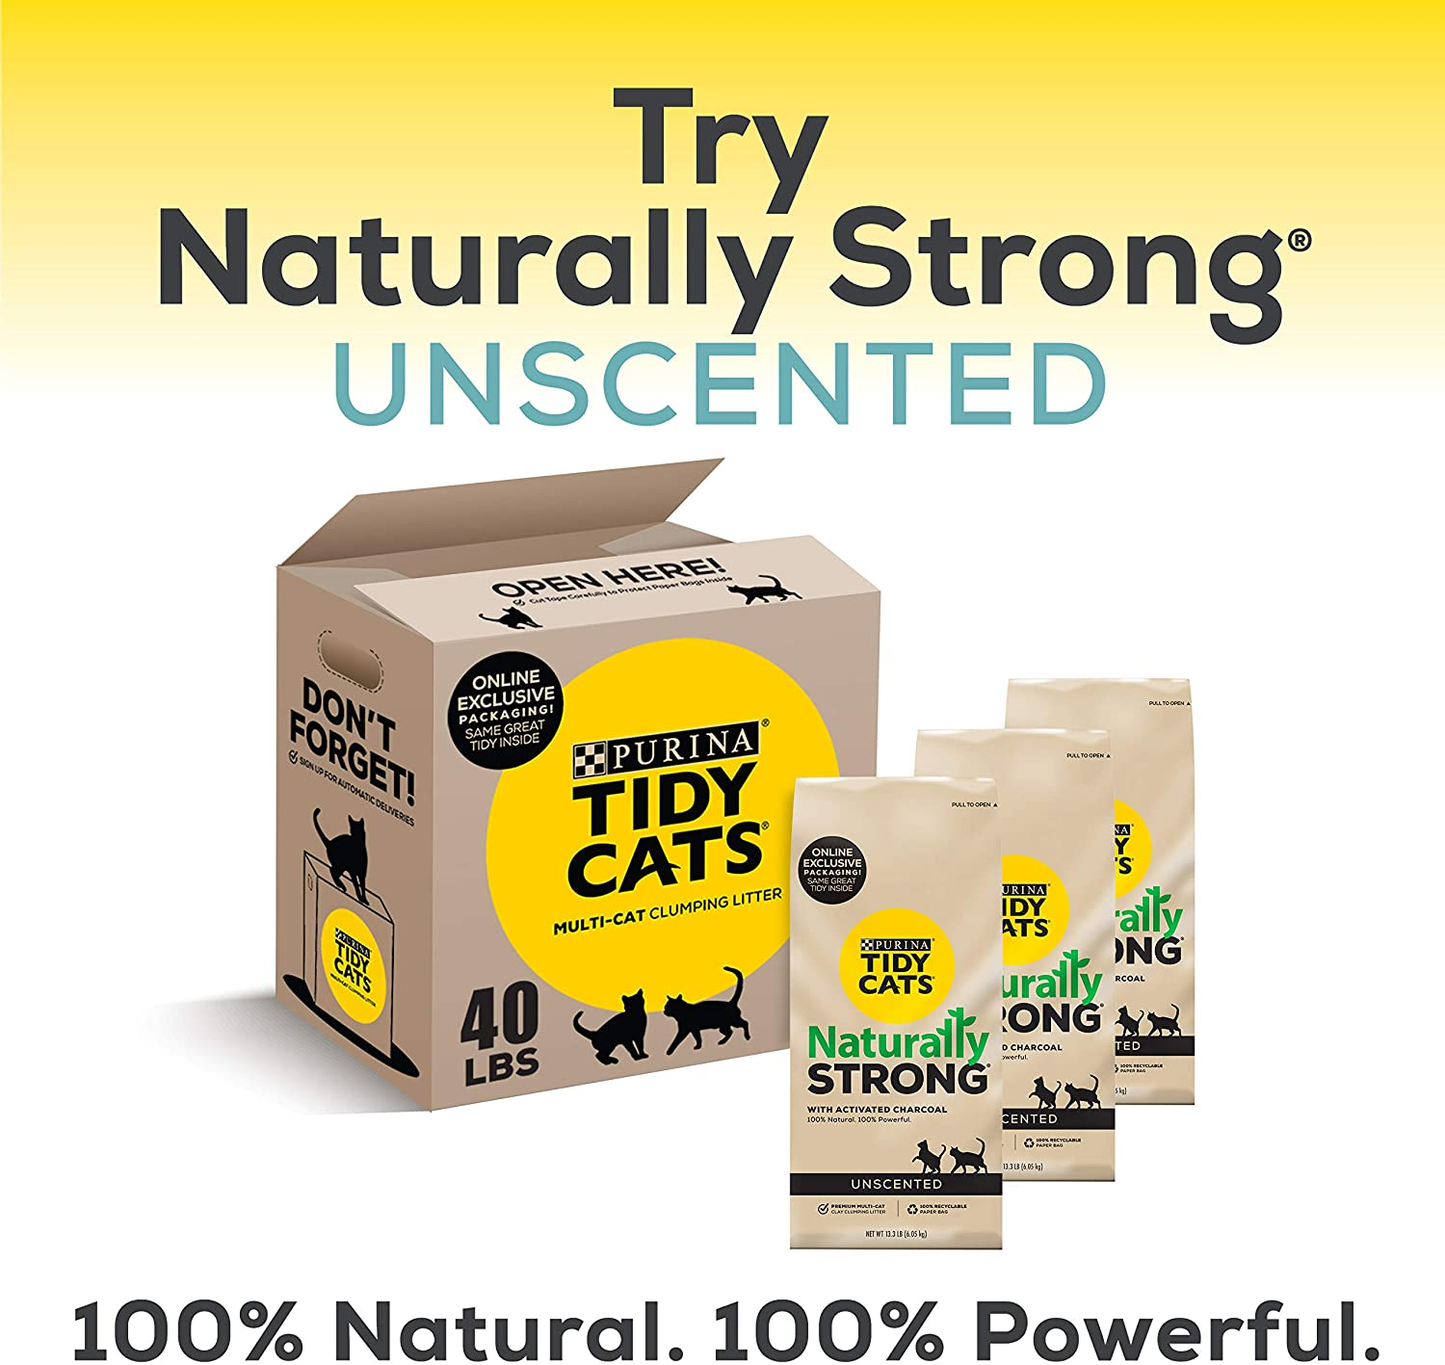 Tidy Cats Unscented Cat Litter, Free & Clean Clumping Clay Cat Litter, Recyclable Box - (3) 13.33 Lb. Bags